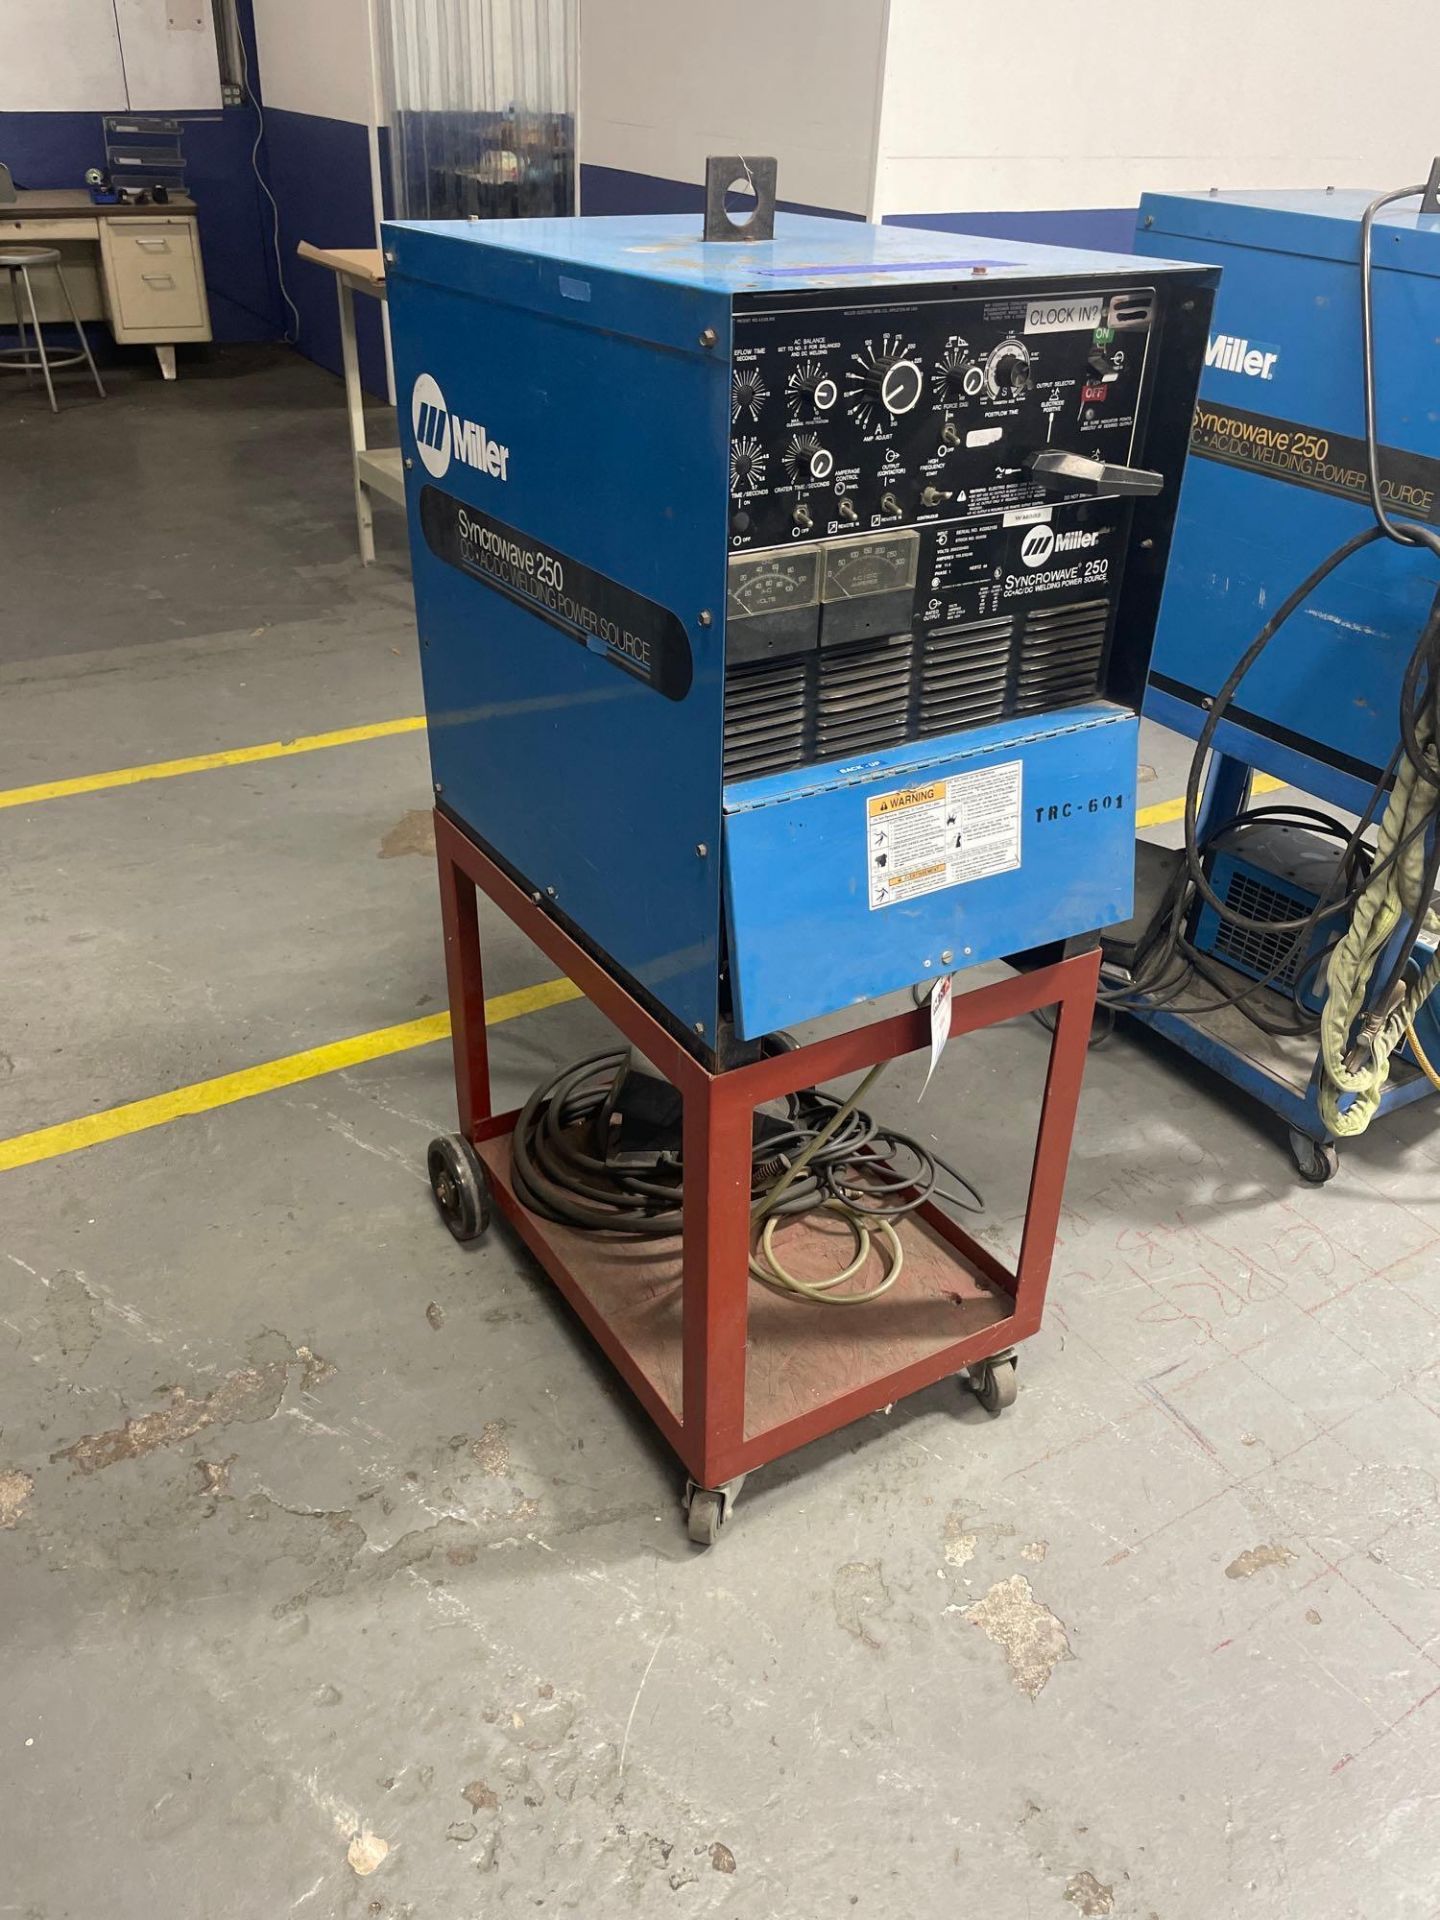 Miller Syncrowave 250 CC AC?DC Welding Power Source, s/n KG052105 - Image 3 of 7